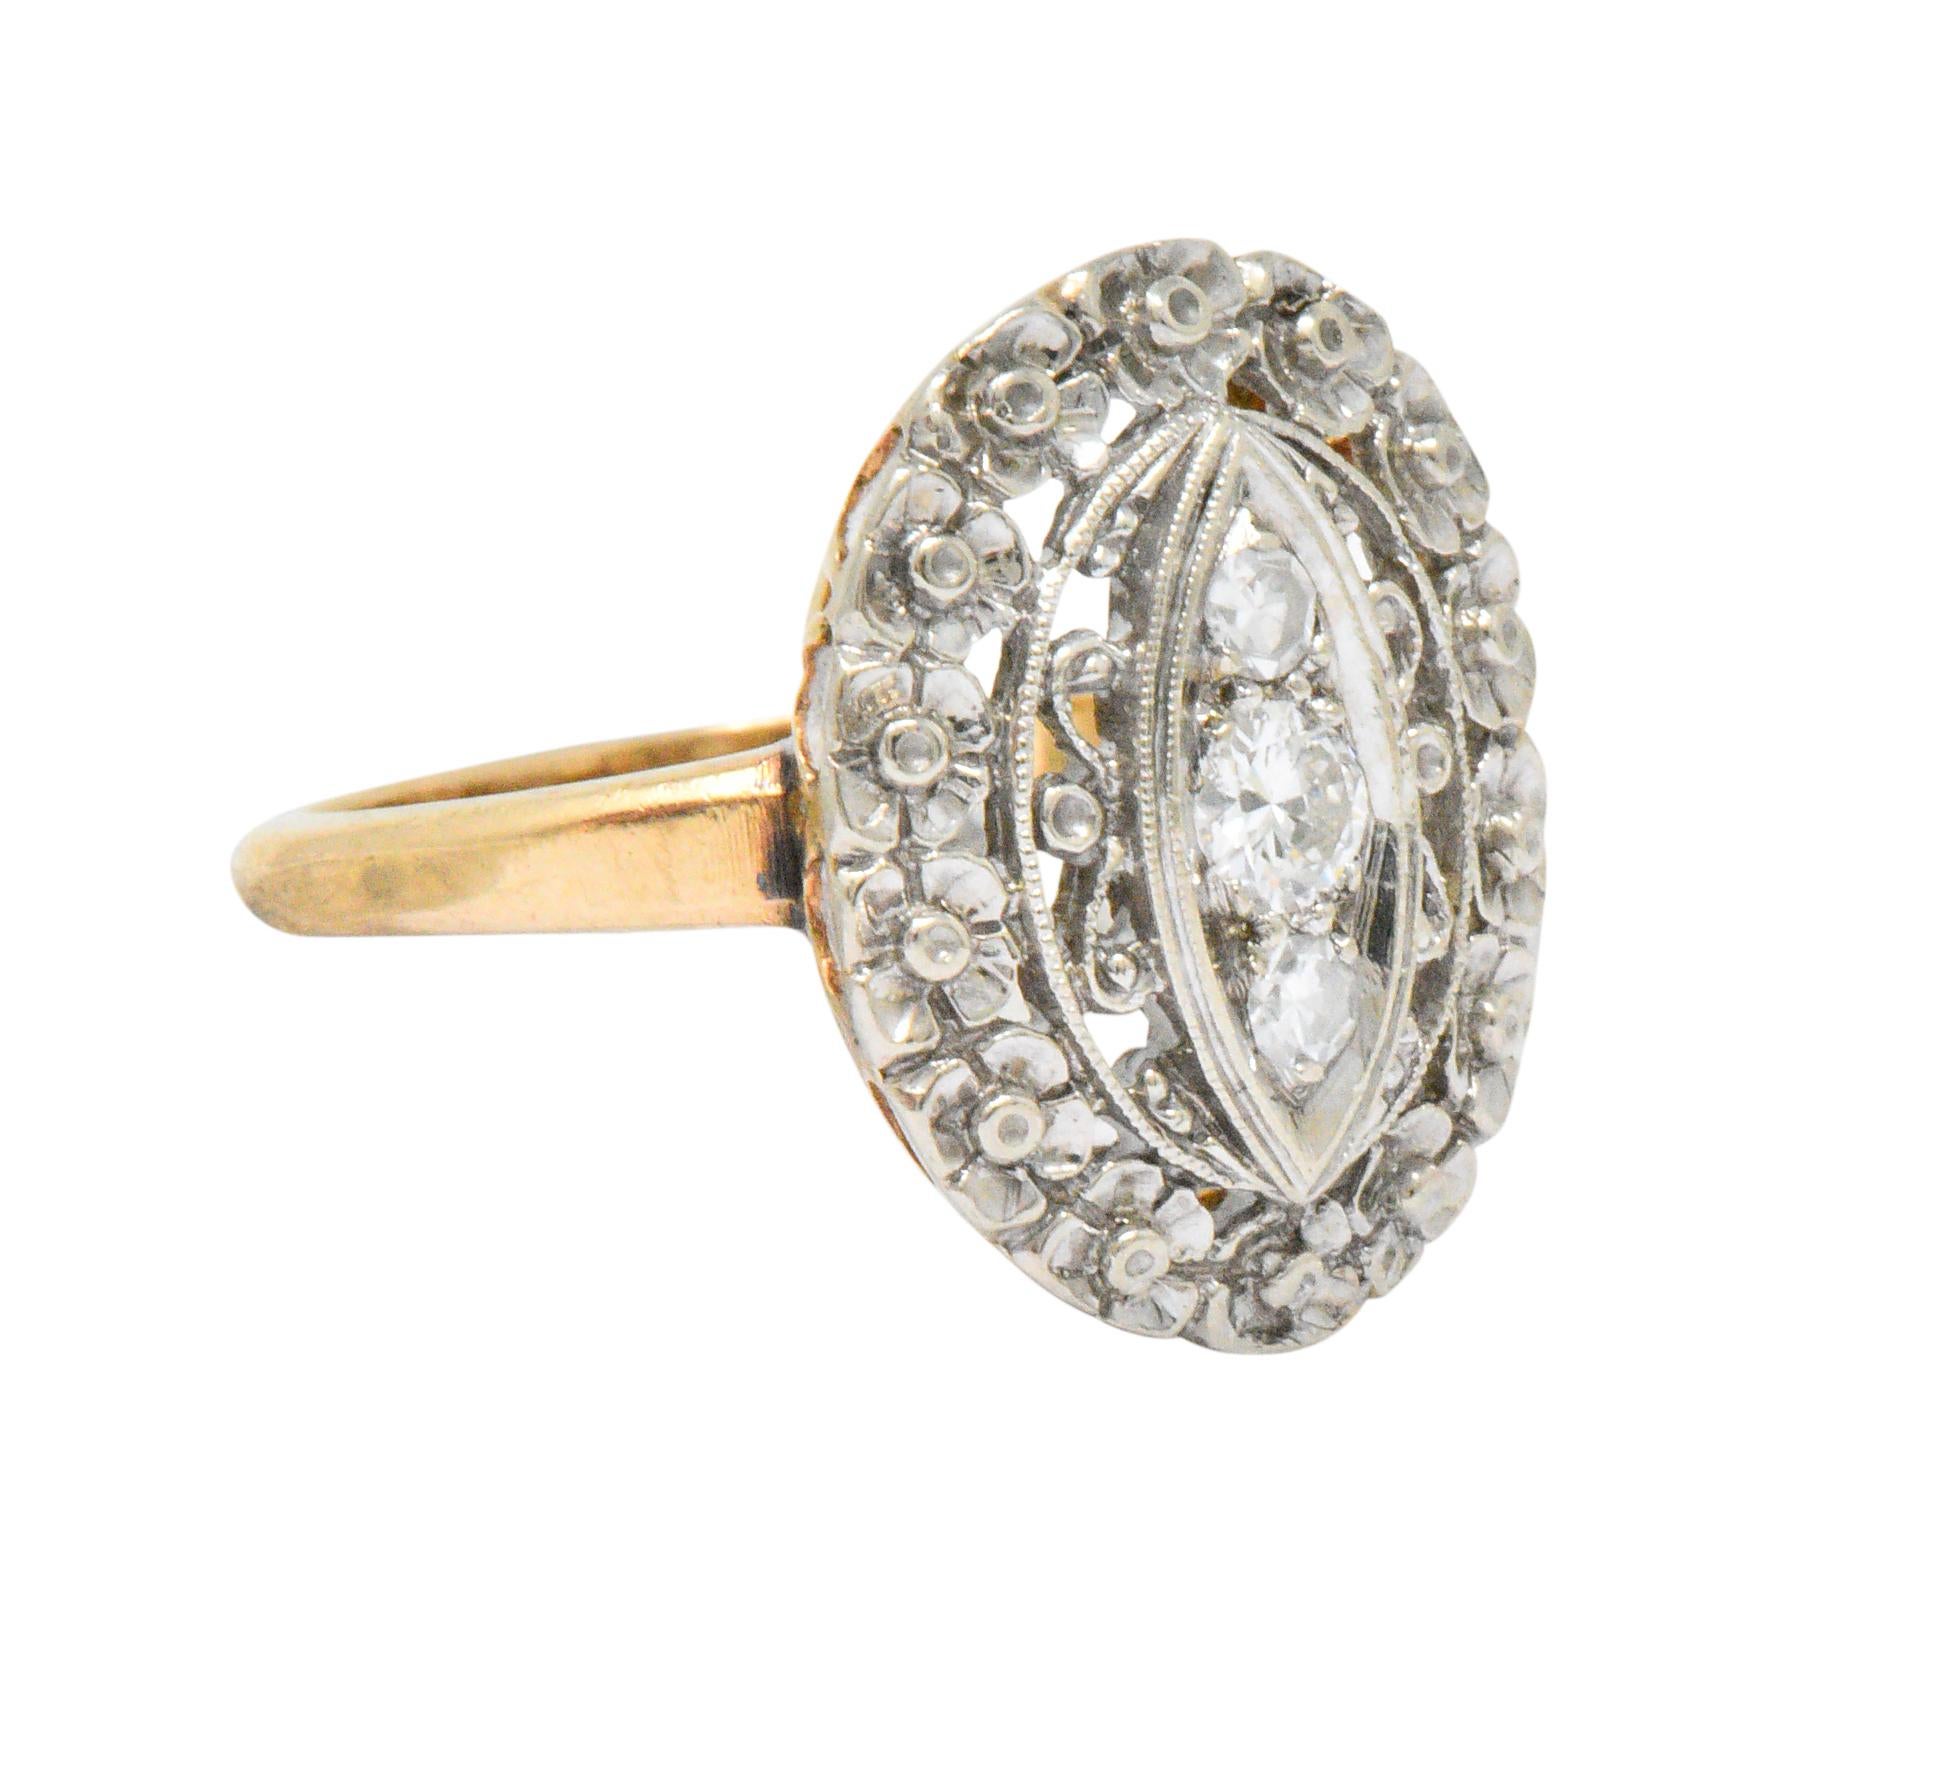 Centering a round brilliant cut diamond with single cut diamonds above and below, three diamonds total, weighing approximately 0.20 carat total, eye-clean and white 

Lovely pierced floral and scrolling motif surround

CTW: 0.20

Ring Size: 6 &